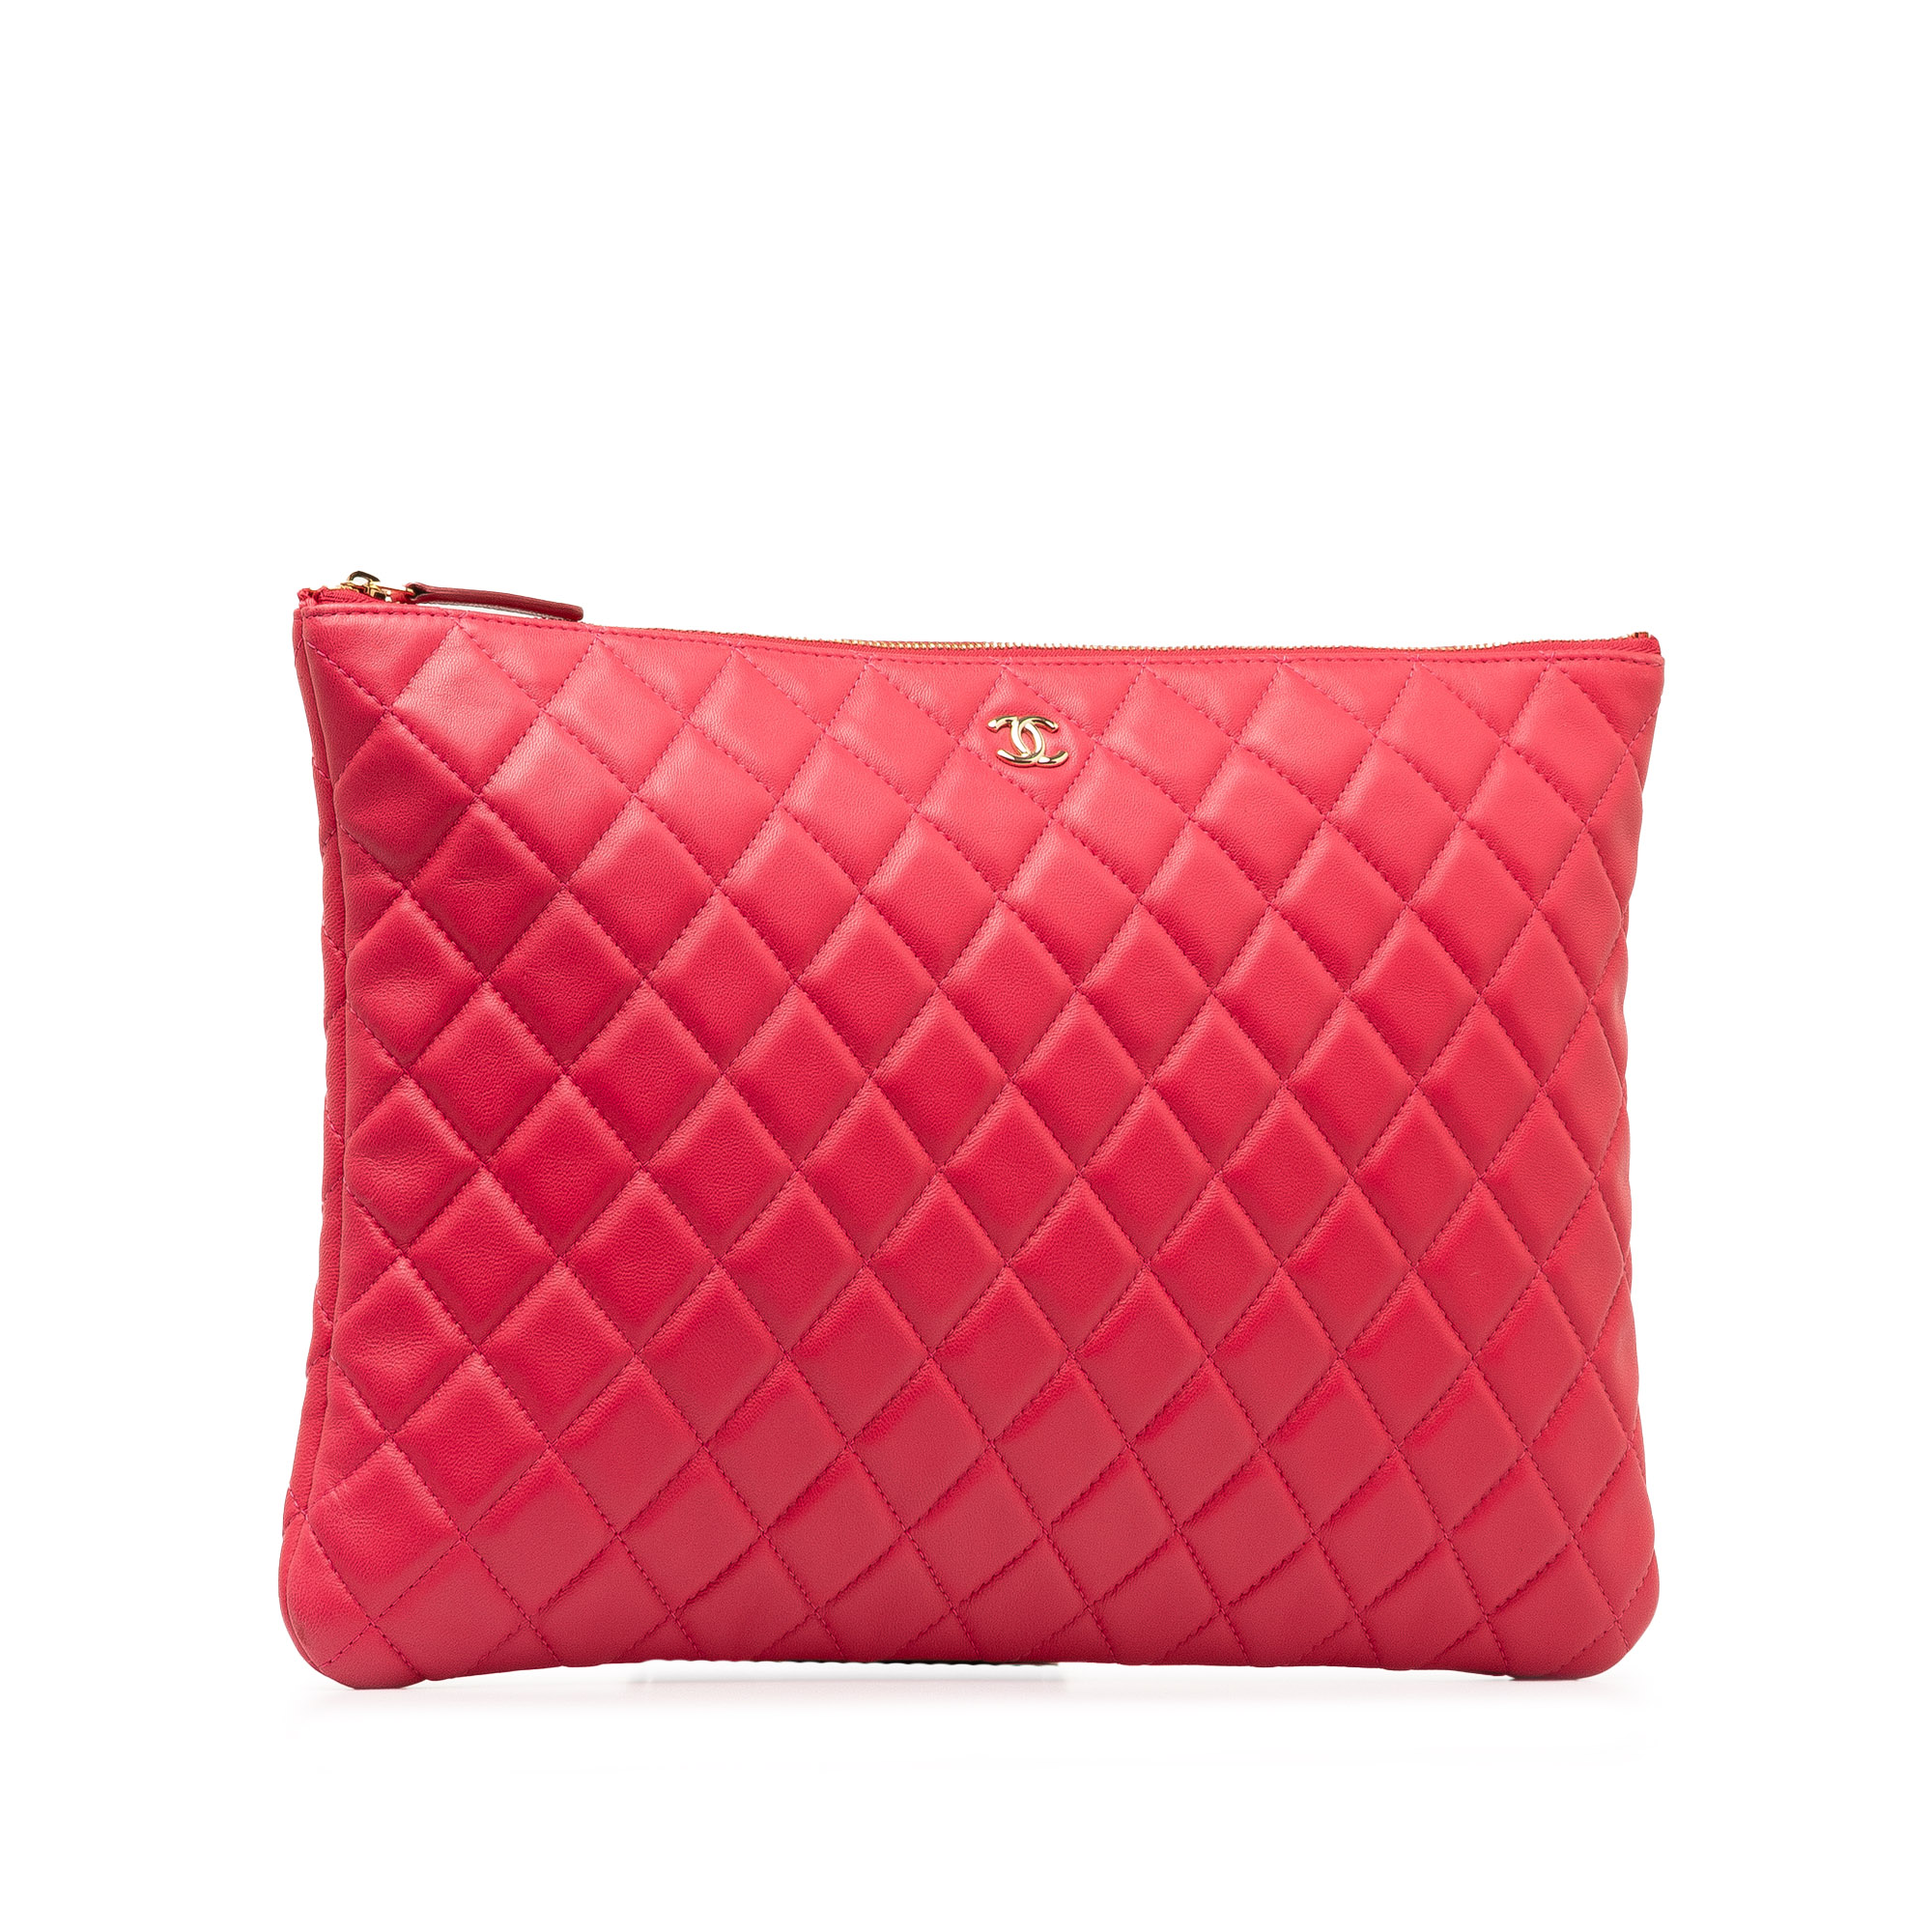 Luxury Quilted Leather Zipper Clutch